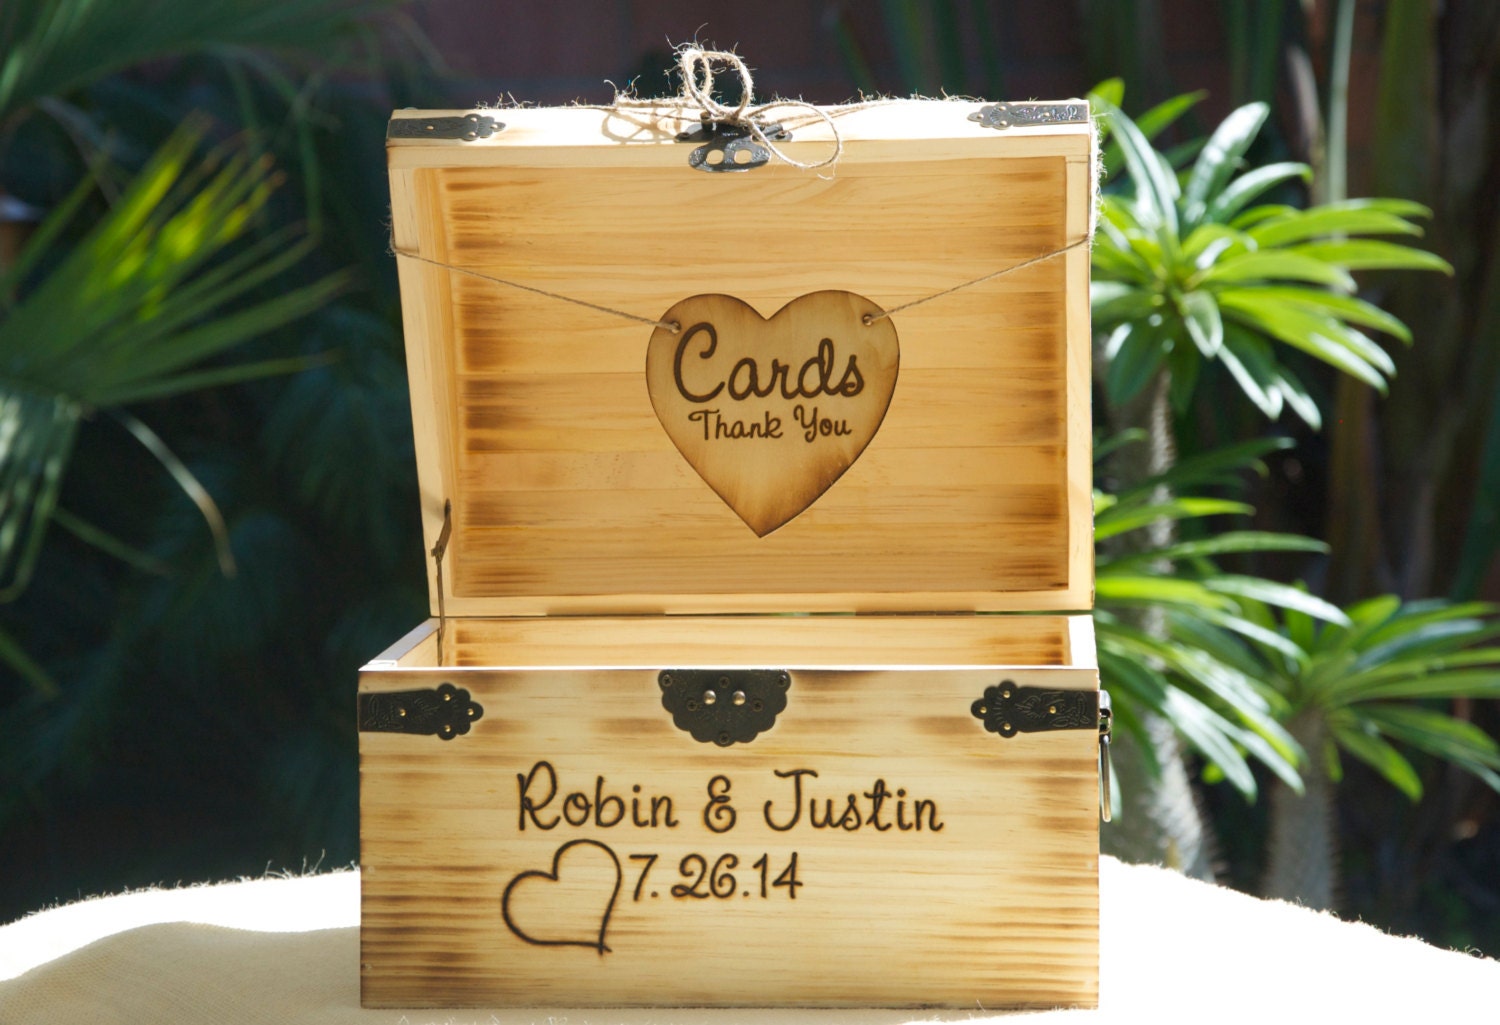 Large Rustic Wedding Card Box - Treasure Chest - Burned/Engraved - Personalized Rustic Card Box - Torched and hand Burned/Engraved